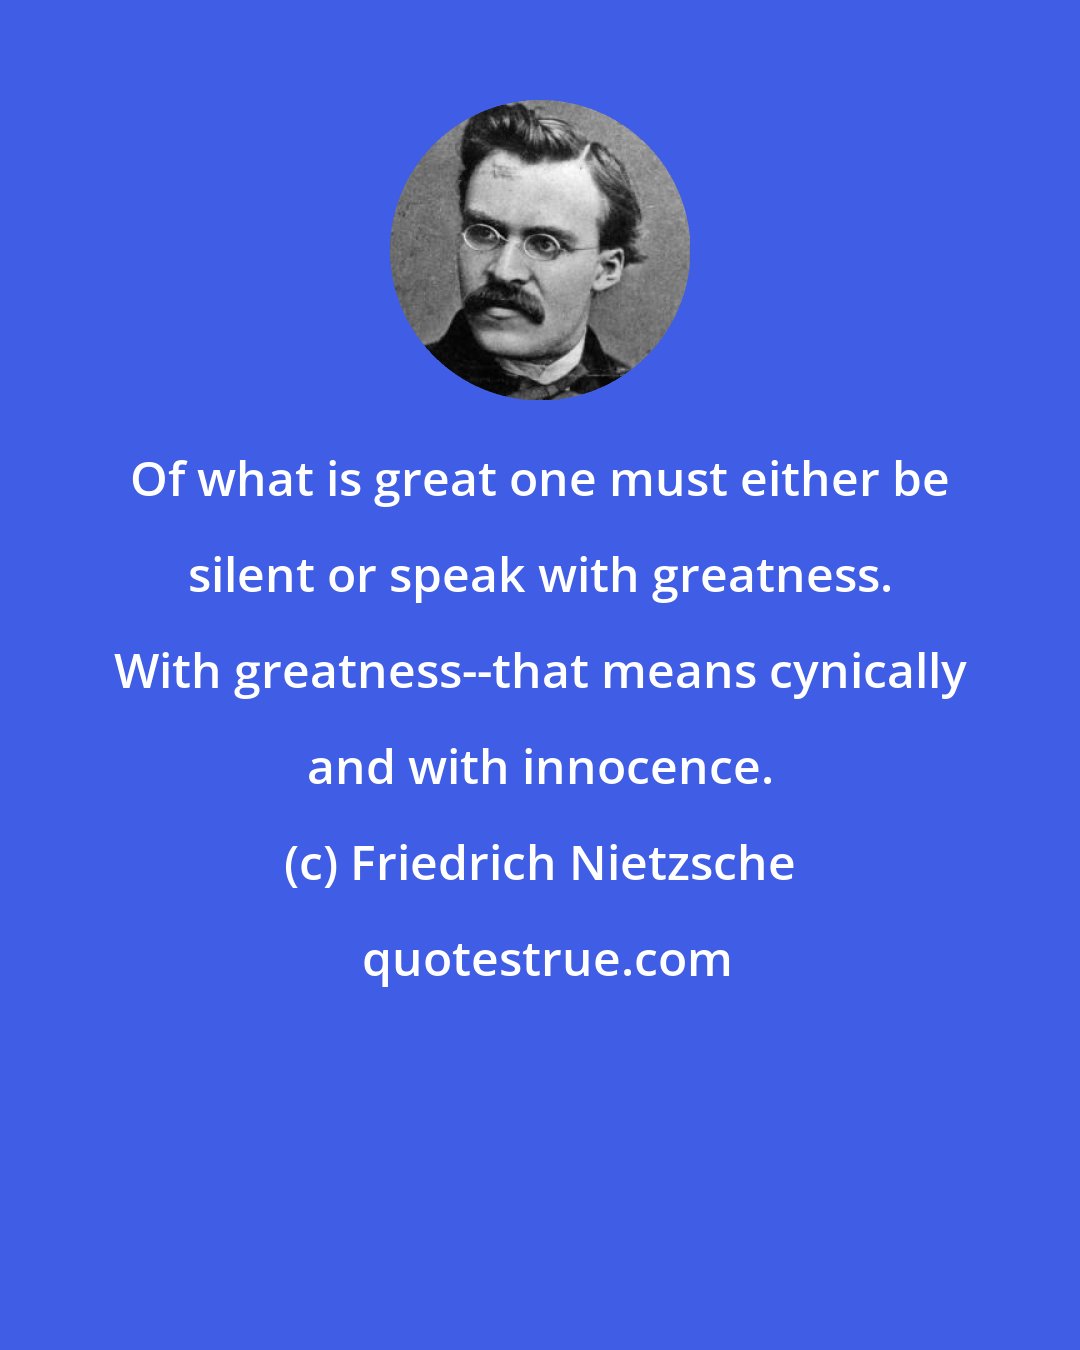 Friedrich Nietzsche: Of what is great one must either be silent or speak with greatness. With greatness--that means cynically and with innocence.